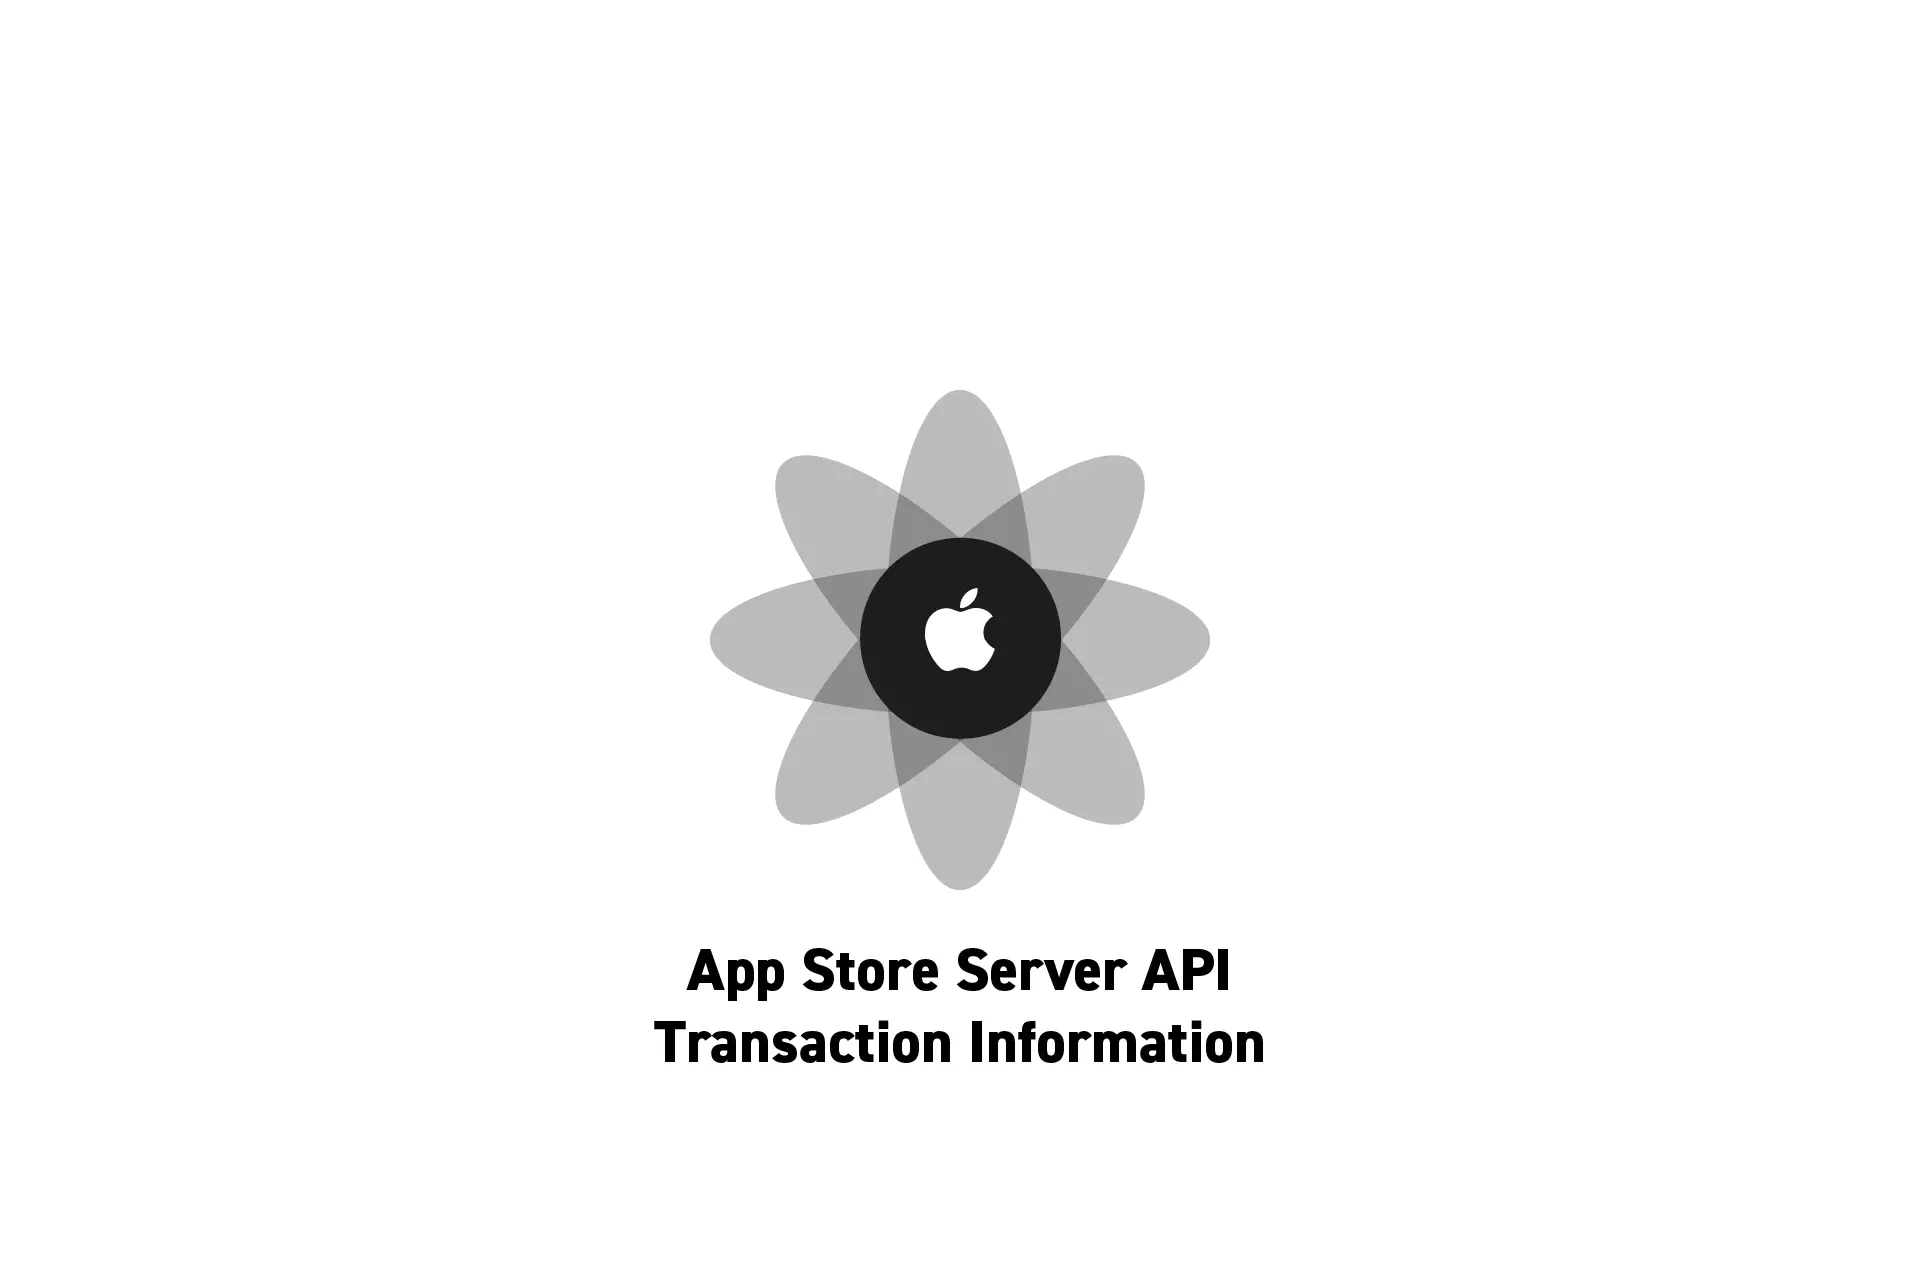 A flower that represents Apple with the text "App Store Server API Transaction Information" beneath it.